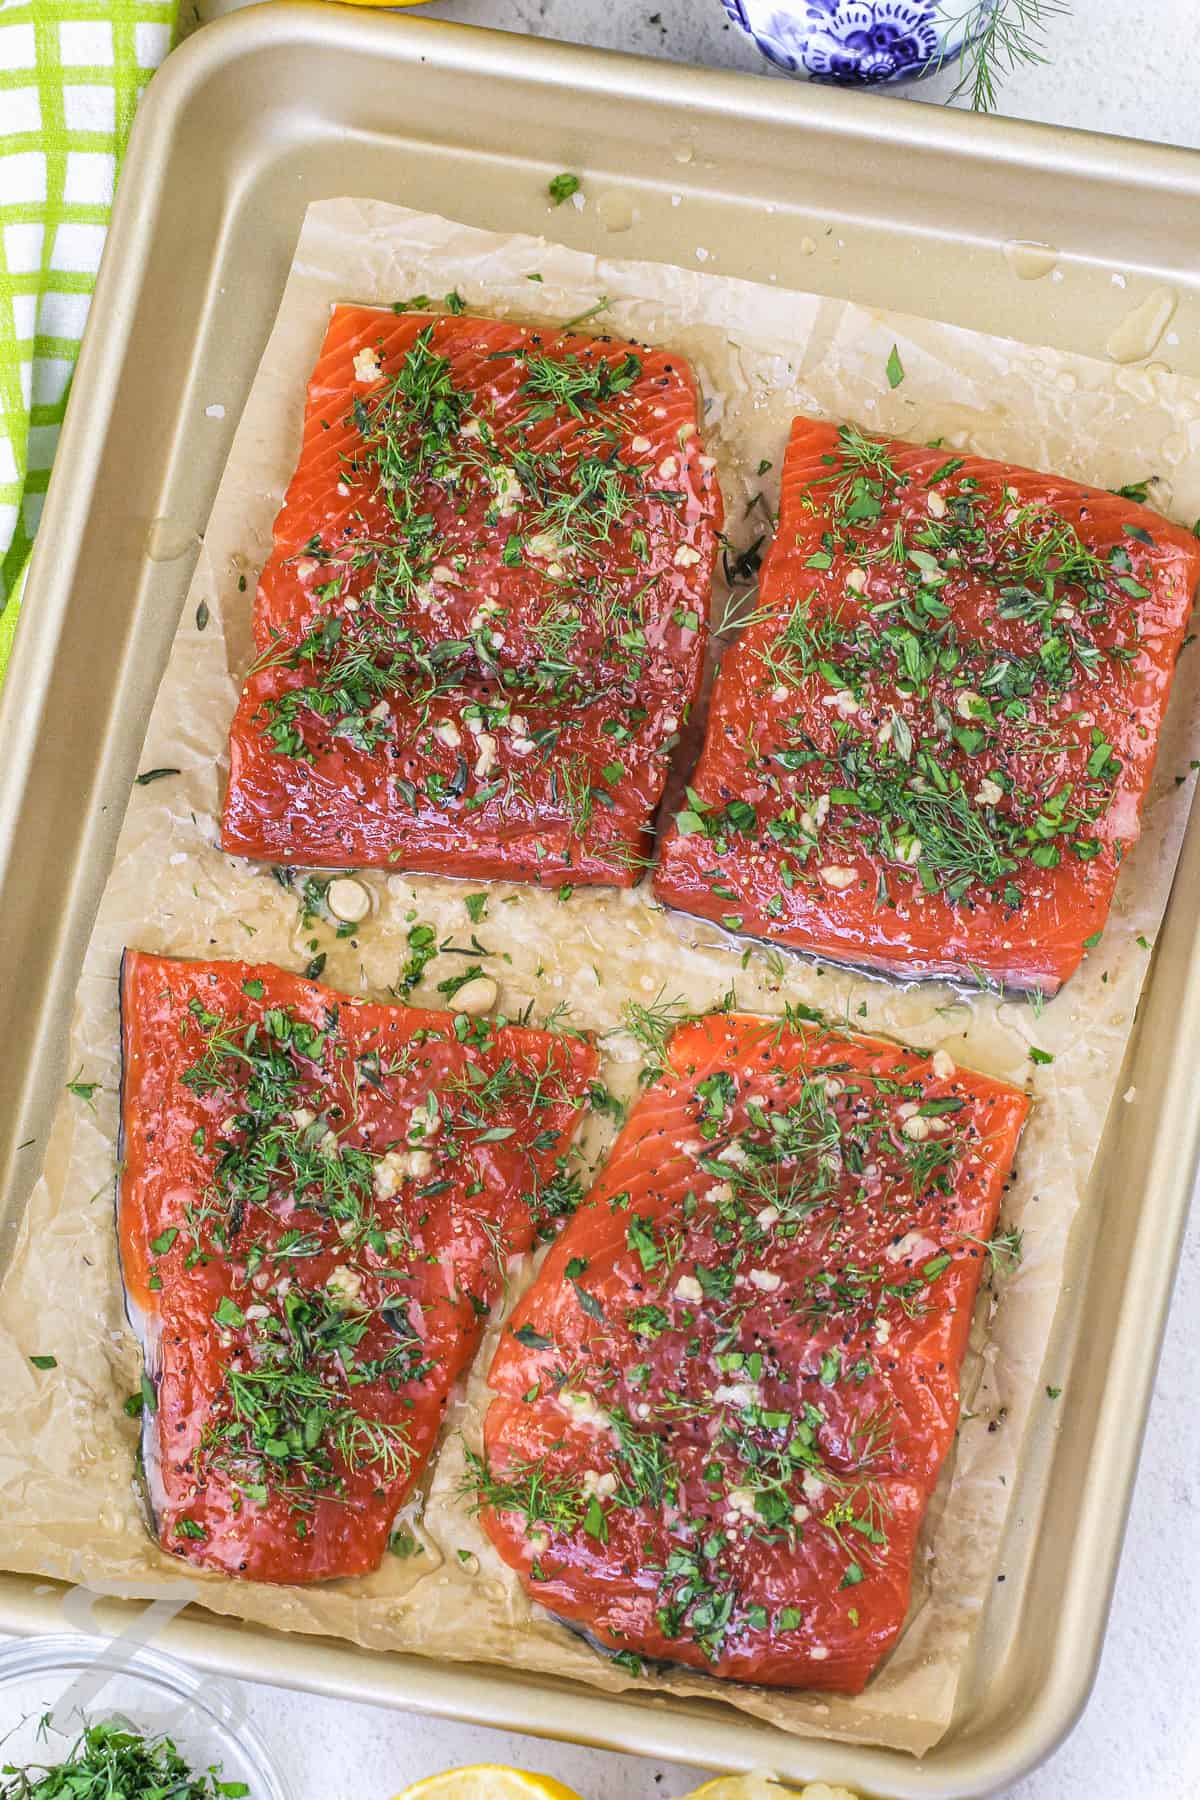 salmon fillets on a baking sheet topped with herbs